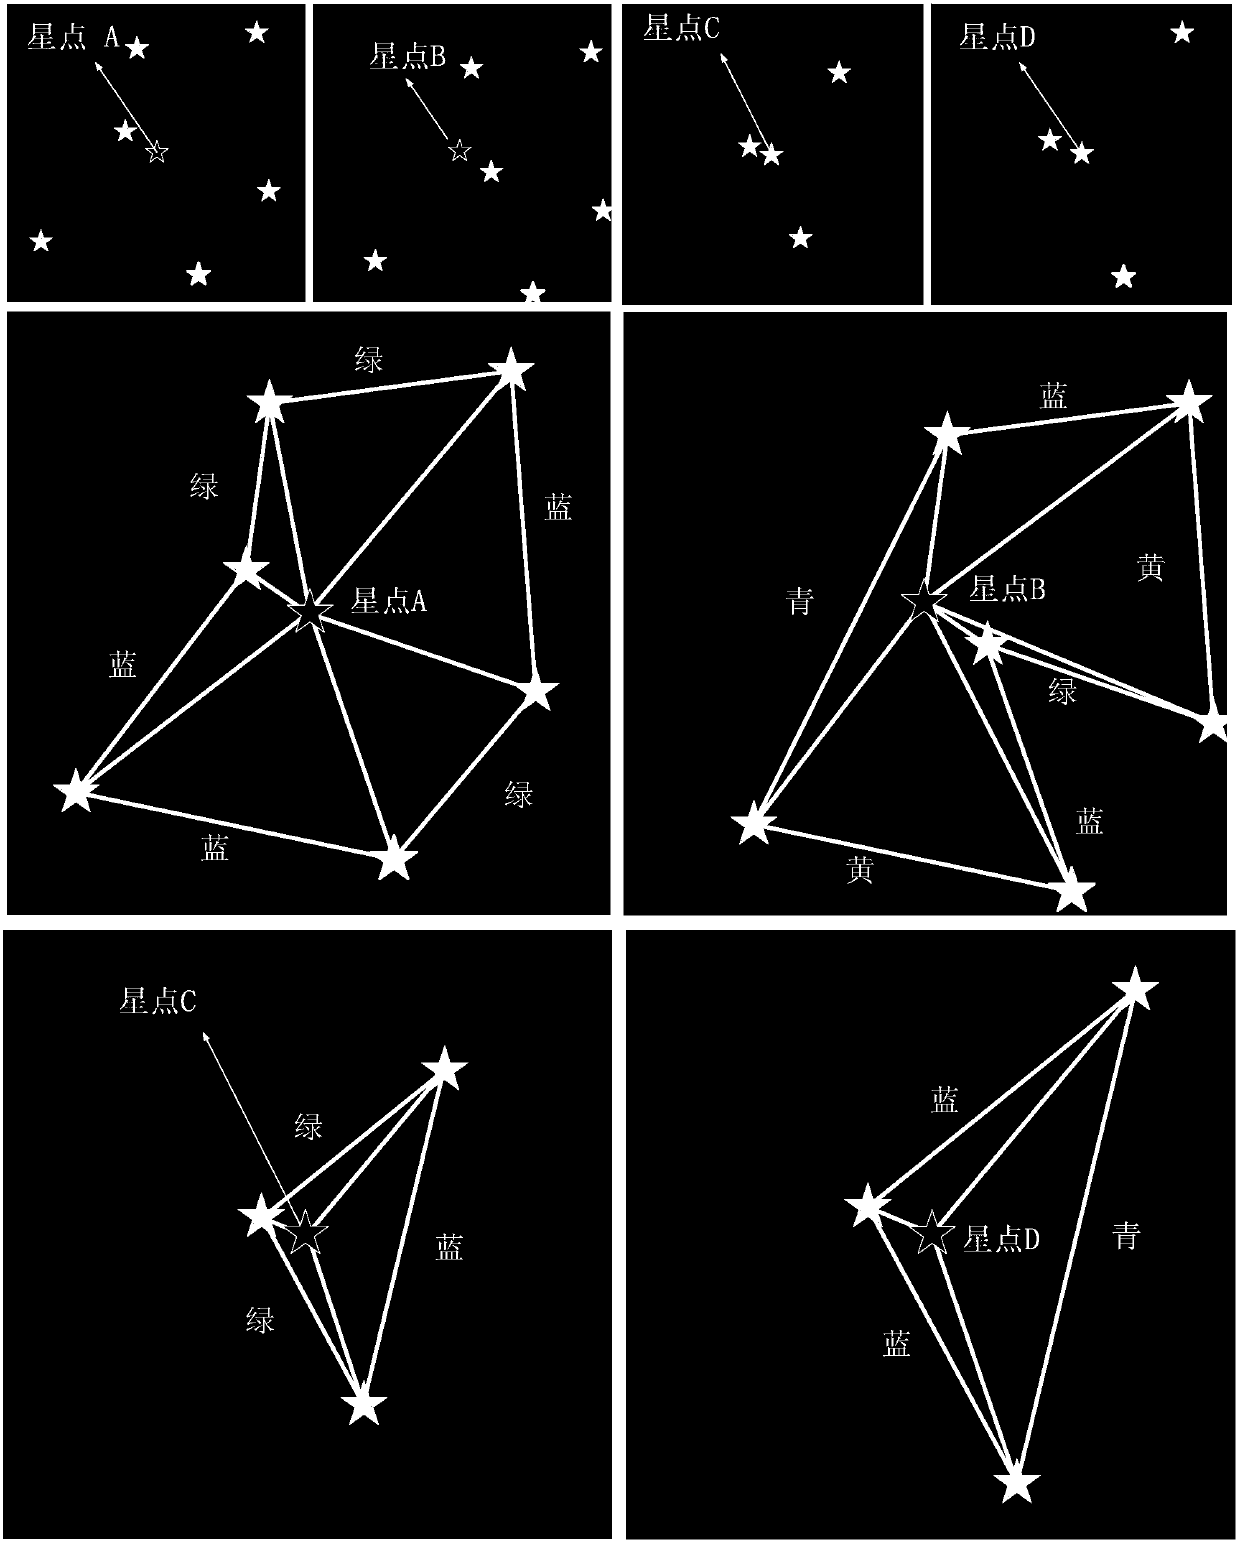 Spider web mode and convolutional neural network based star map identification method